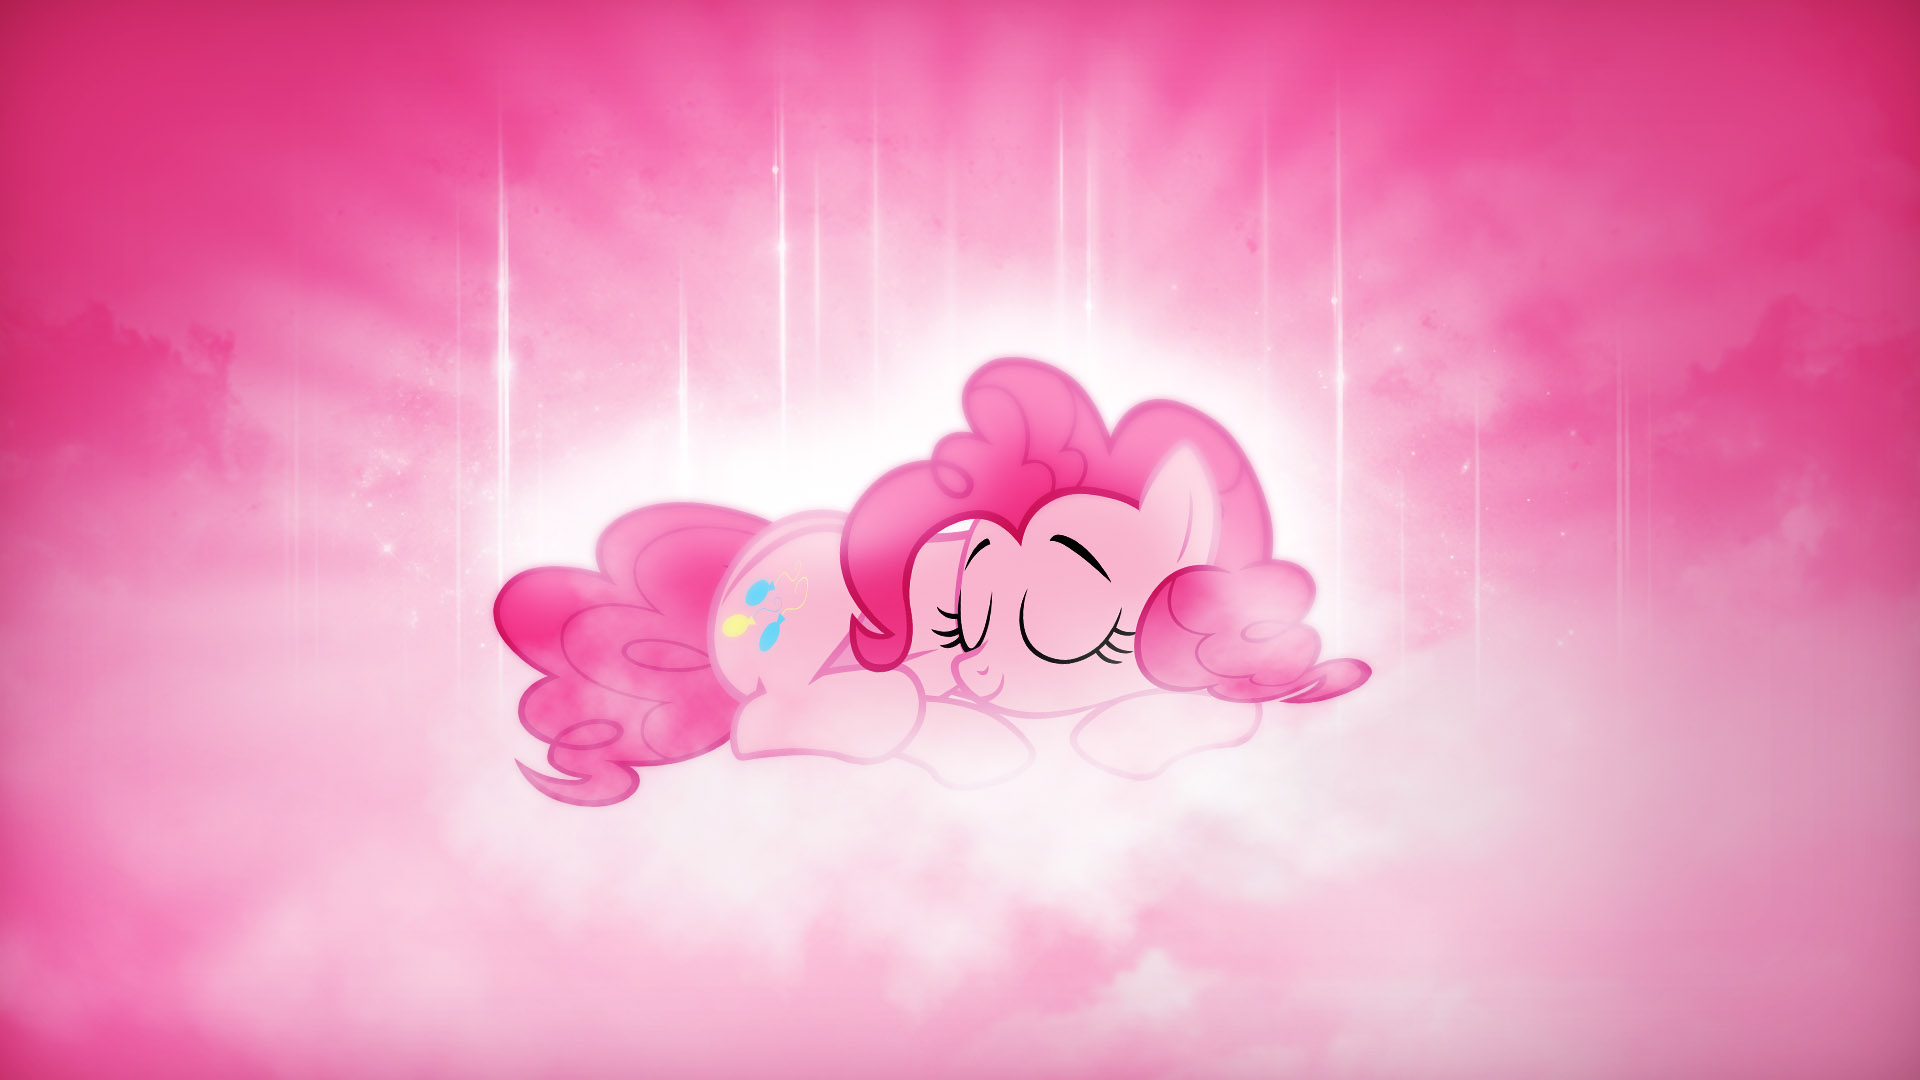 WOTW 3 Pinkie Pie   Sweet cotton candy dreams by romus91 on